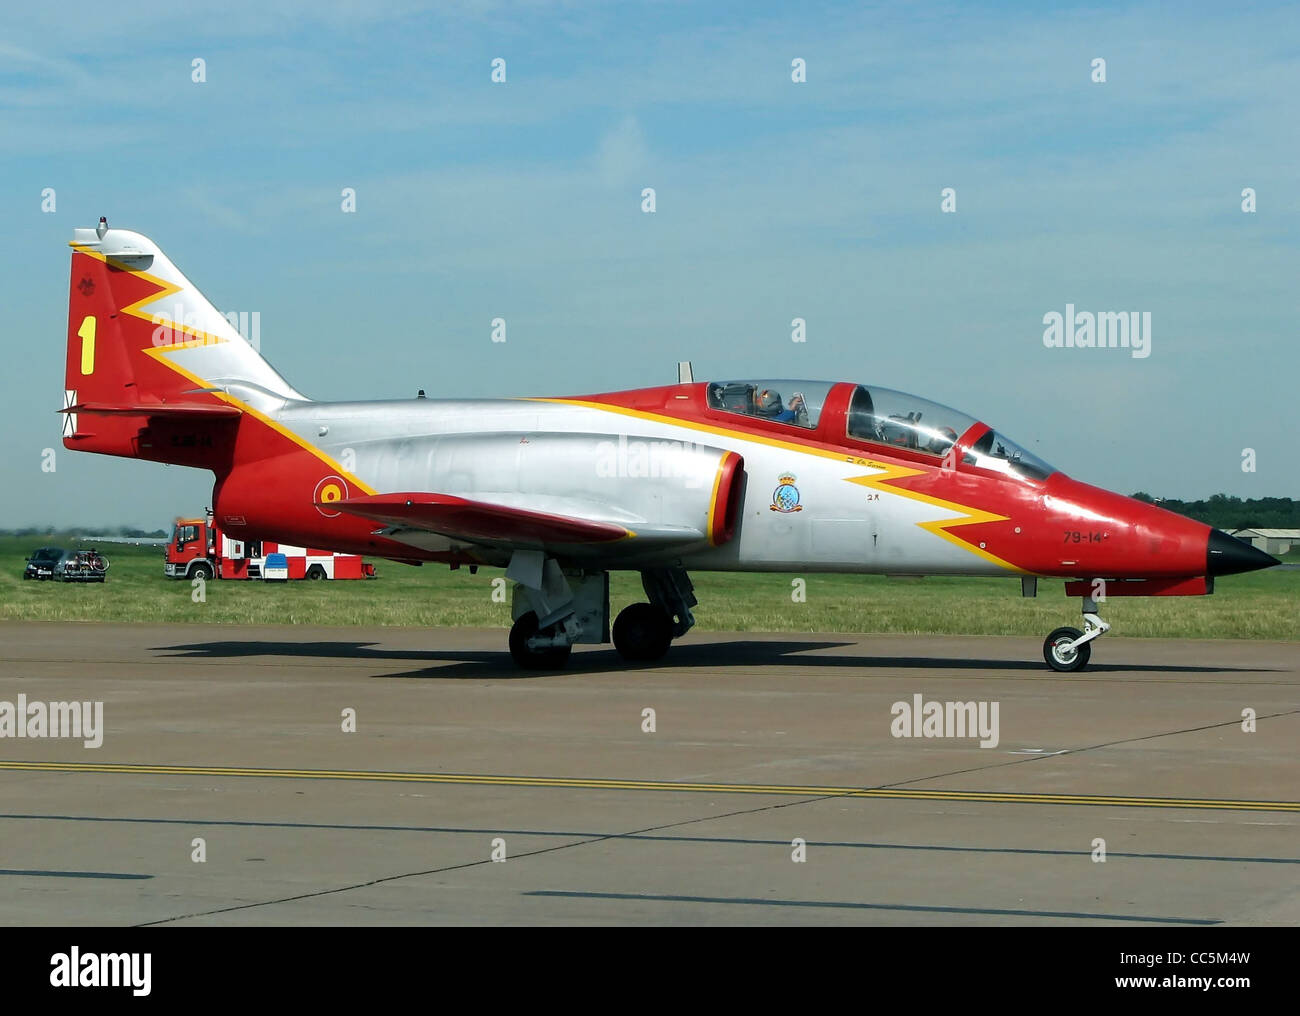 Casa C-101 Aviojet trainer of the Spanish display team Patrulla Aguila, taxiing for takeoff at the Royal International Air Tatto Stock Photo